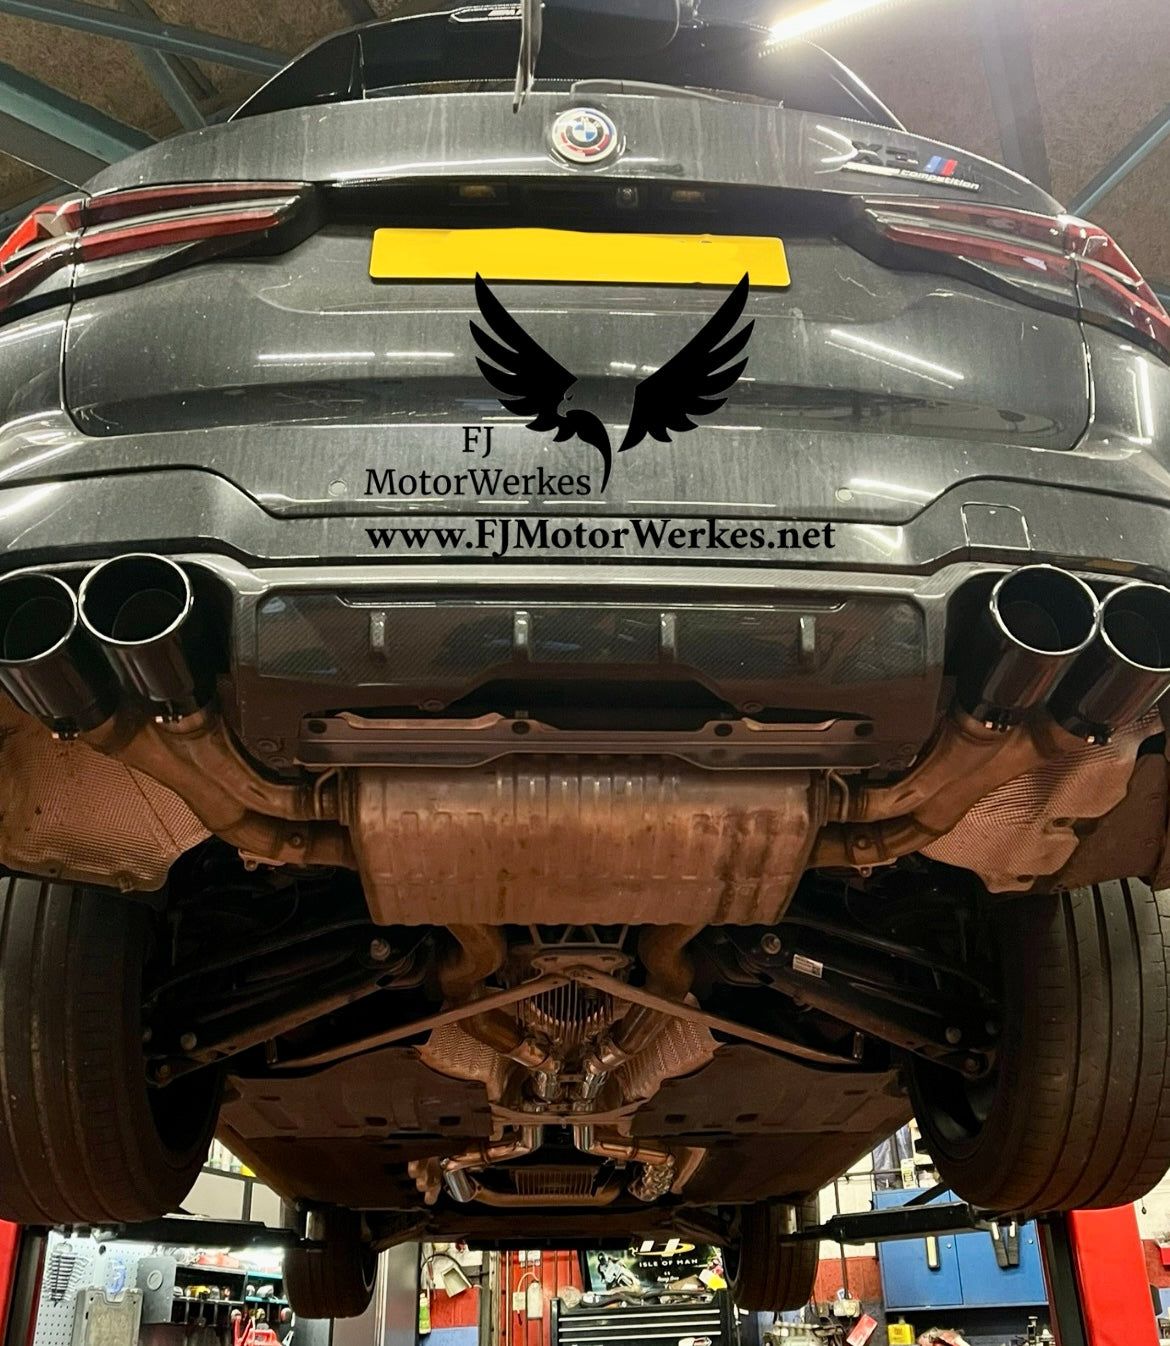 BMW X3M COMP X4M COMP LCI UK Stainless Steel Equal Length Mid Pipe exhaust